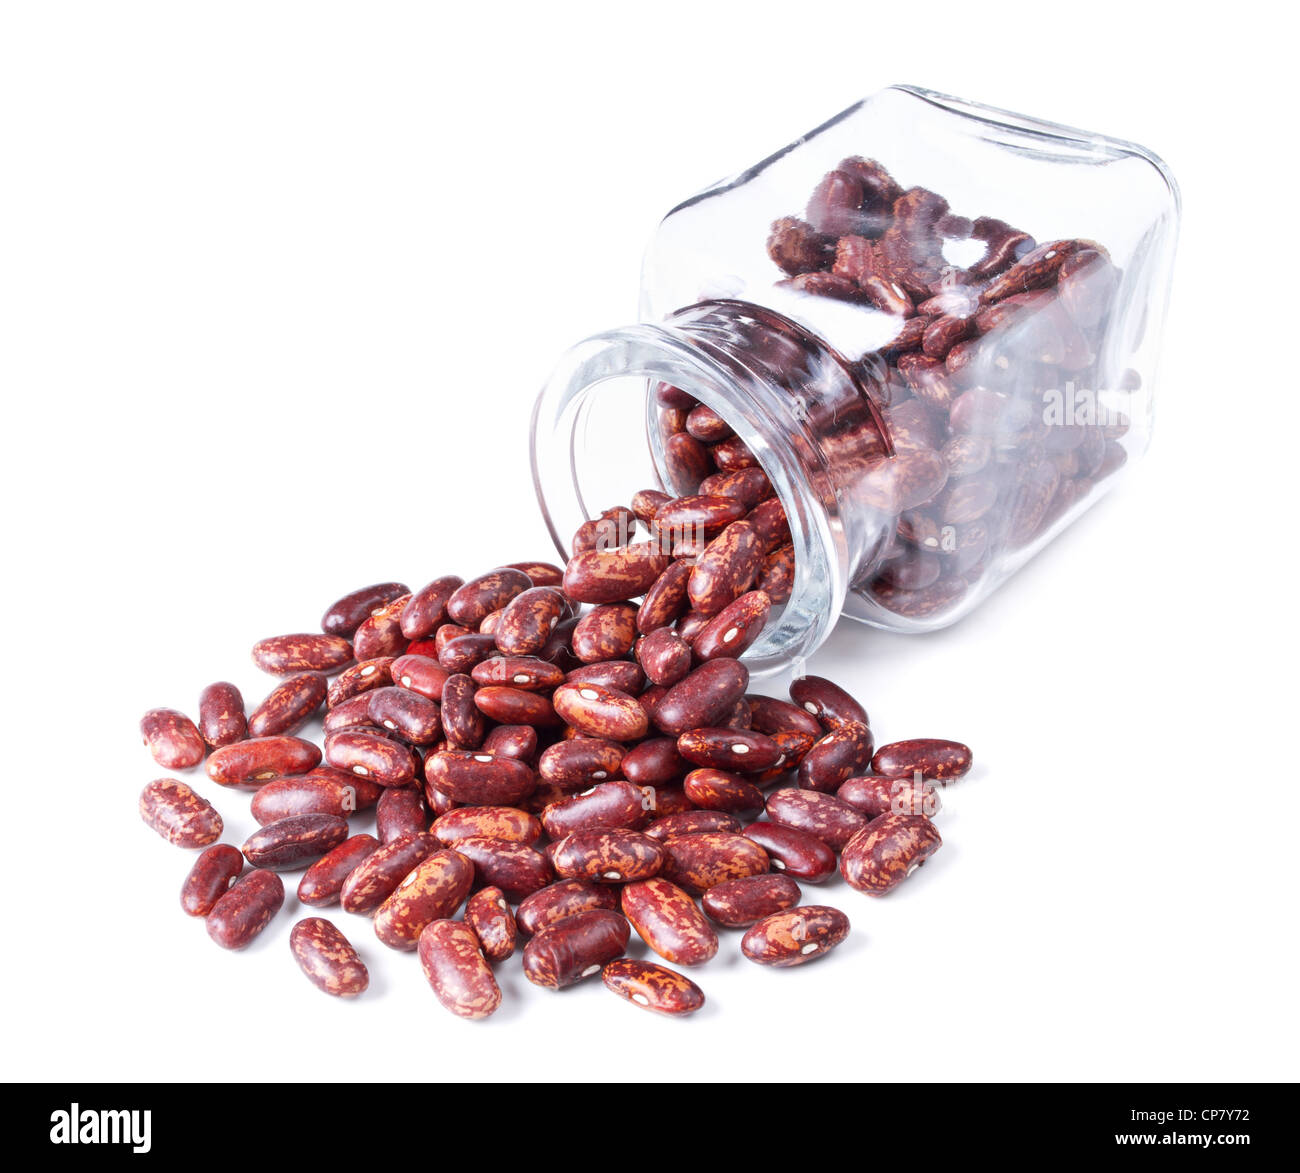 red speckled kidney beans scattered on a white background from glass jar Stock Photo